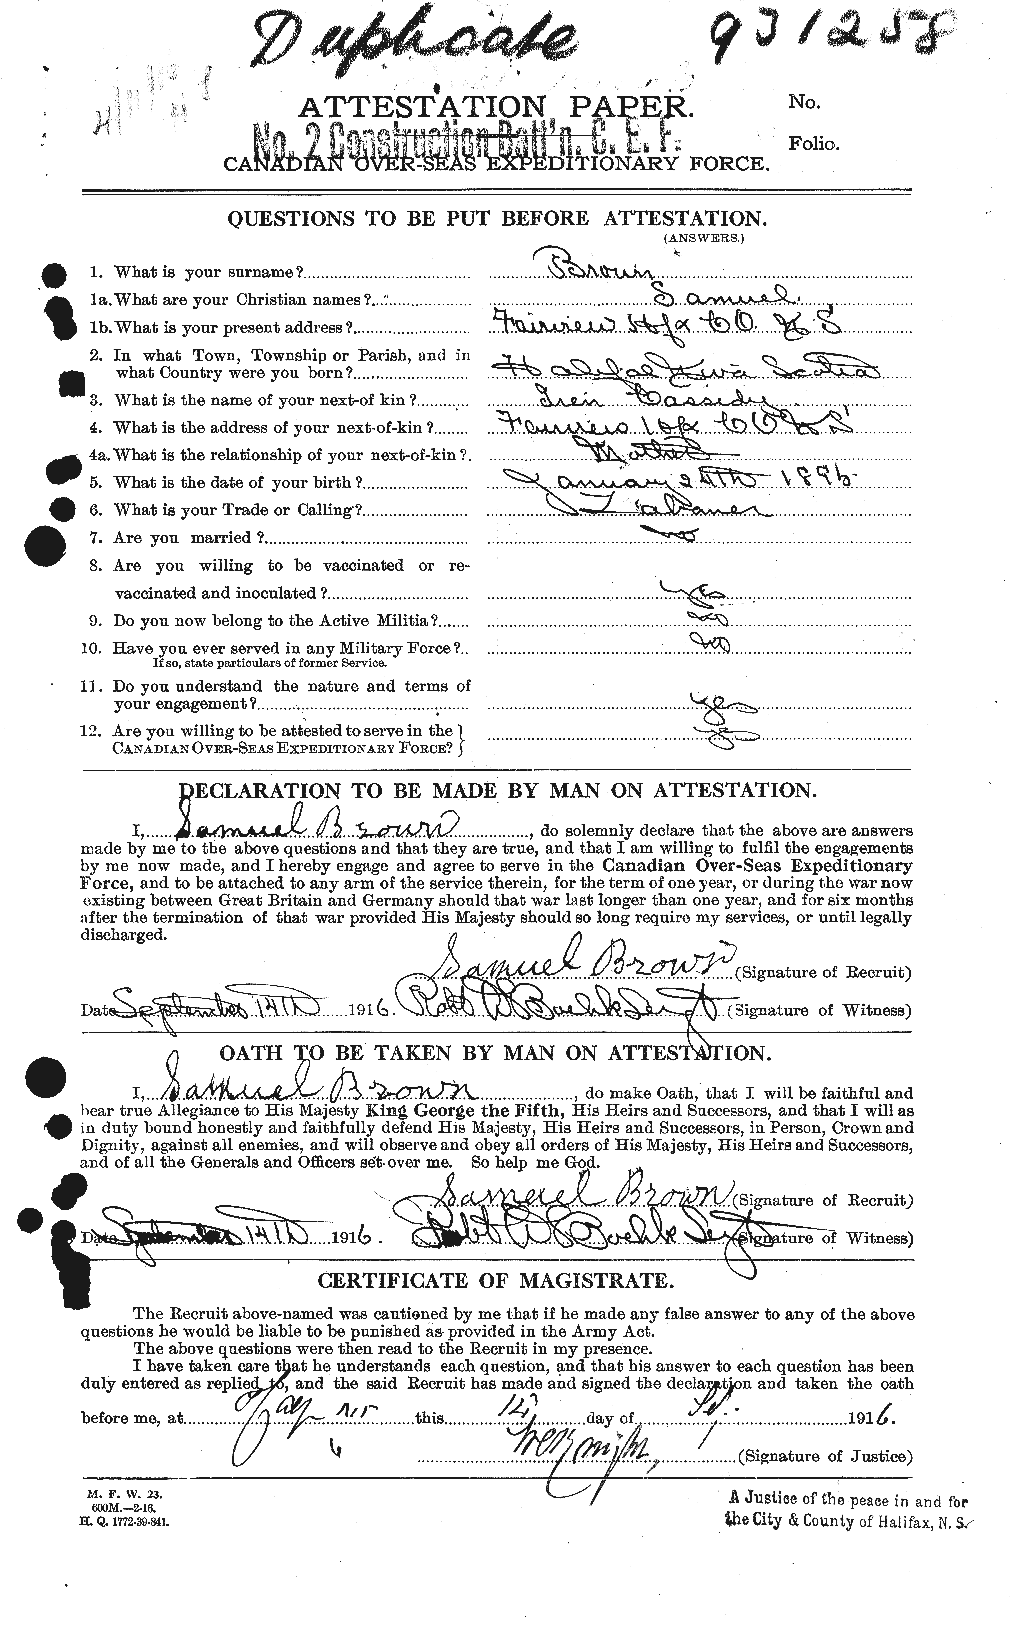 Personnel Records of the First World War - CEF 266382a